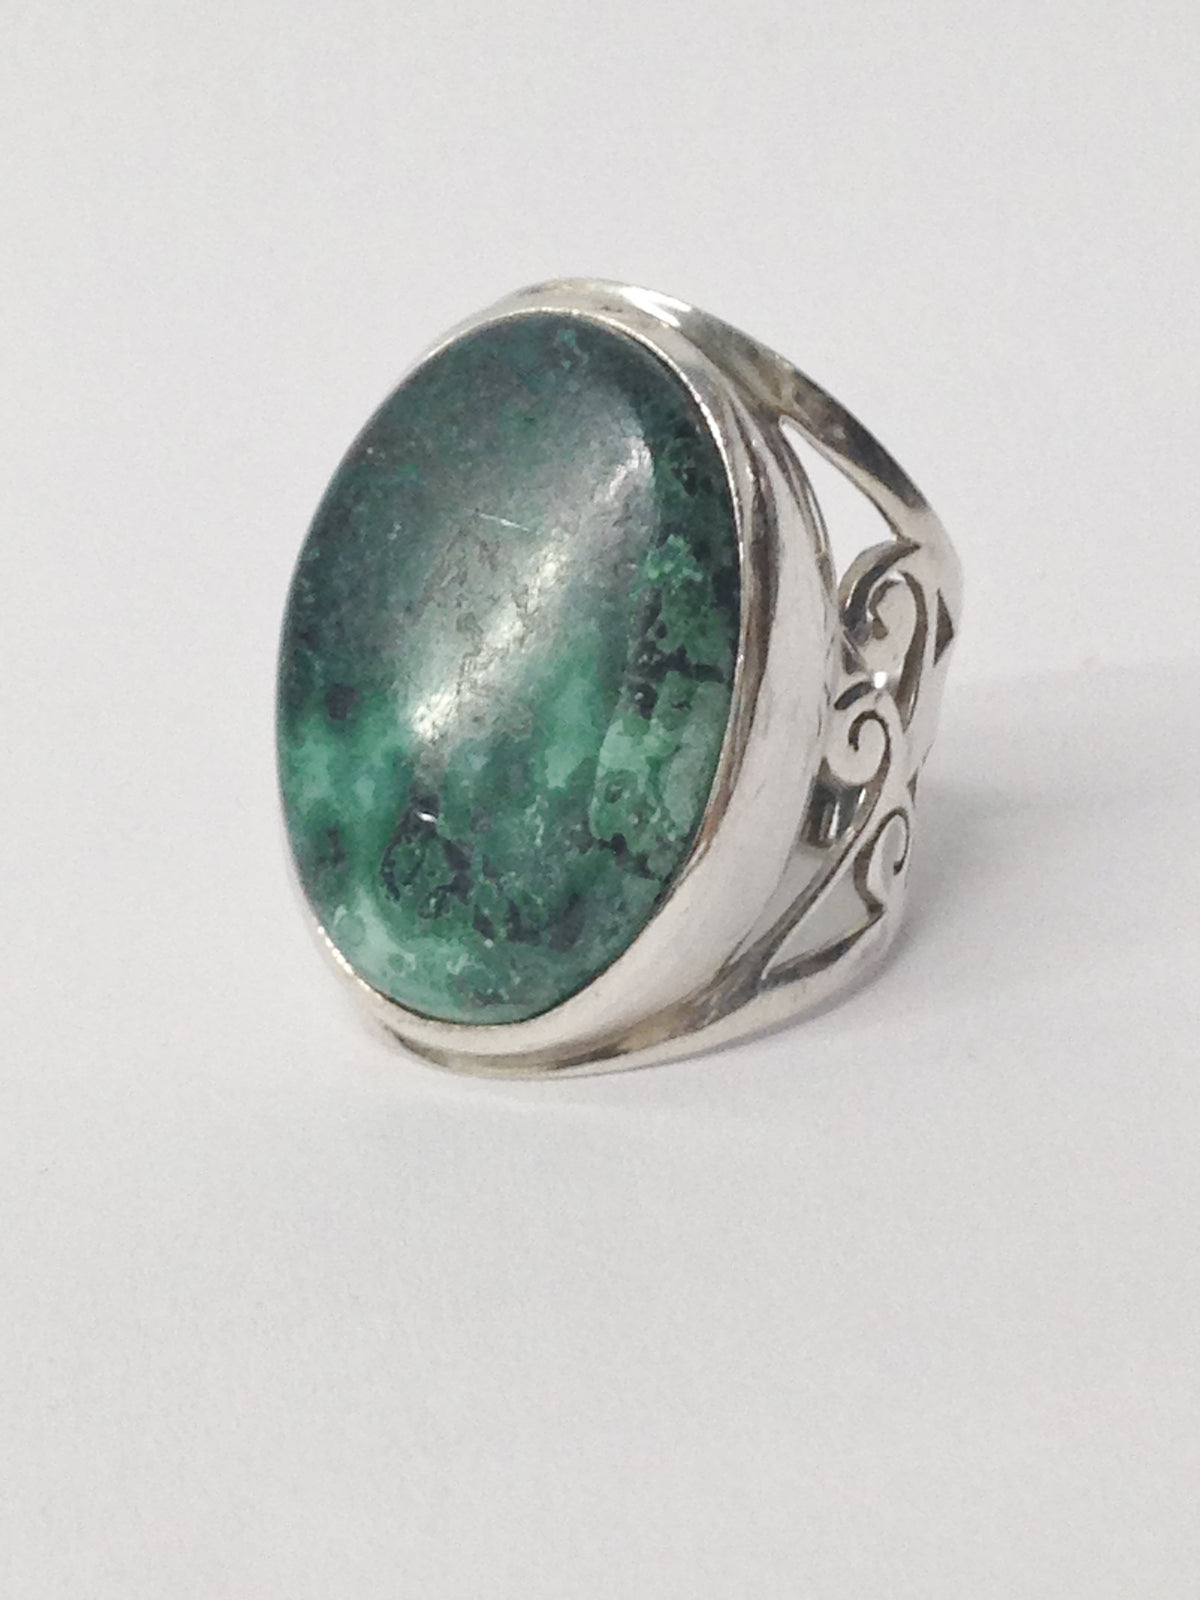 Large Oval Green Turquoise Gemstone .925 Sterling Silver Ring www.hersandhistreasures.com/collections/sterling-silver-jewelry